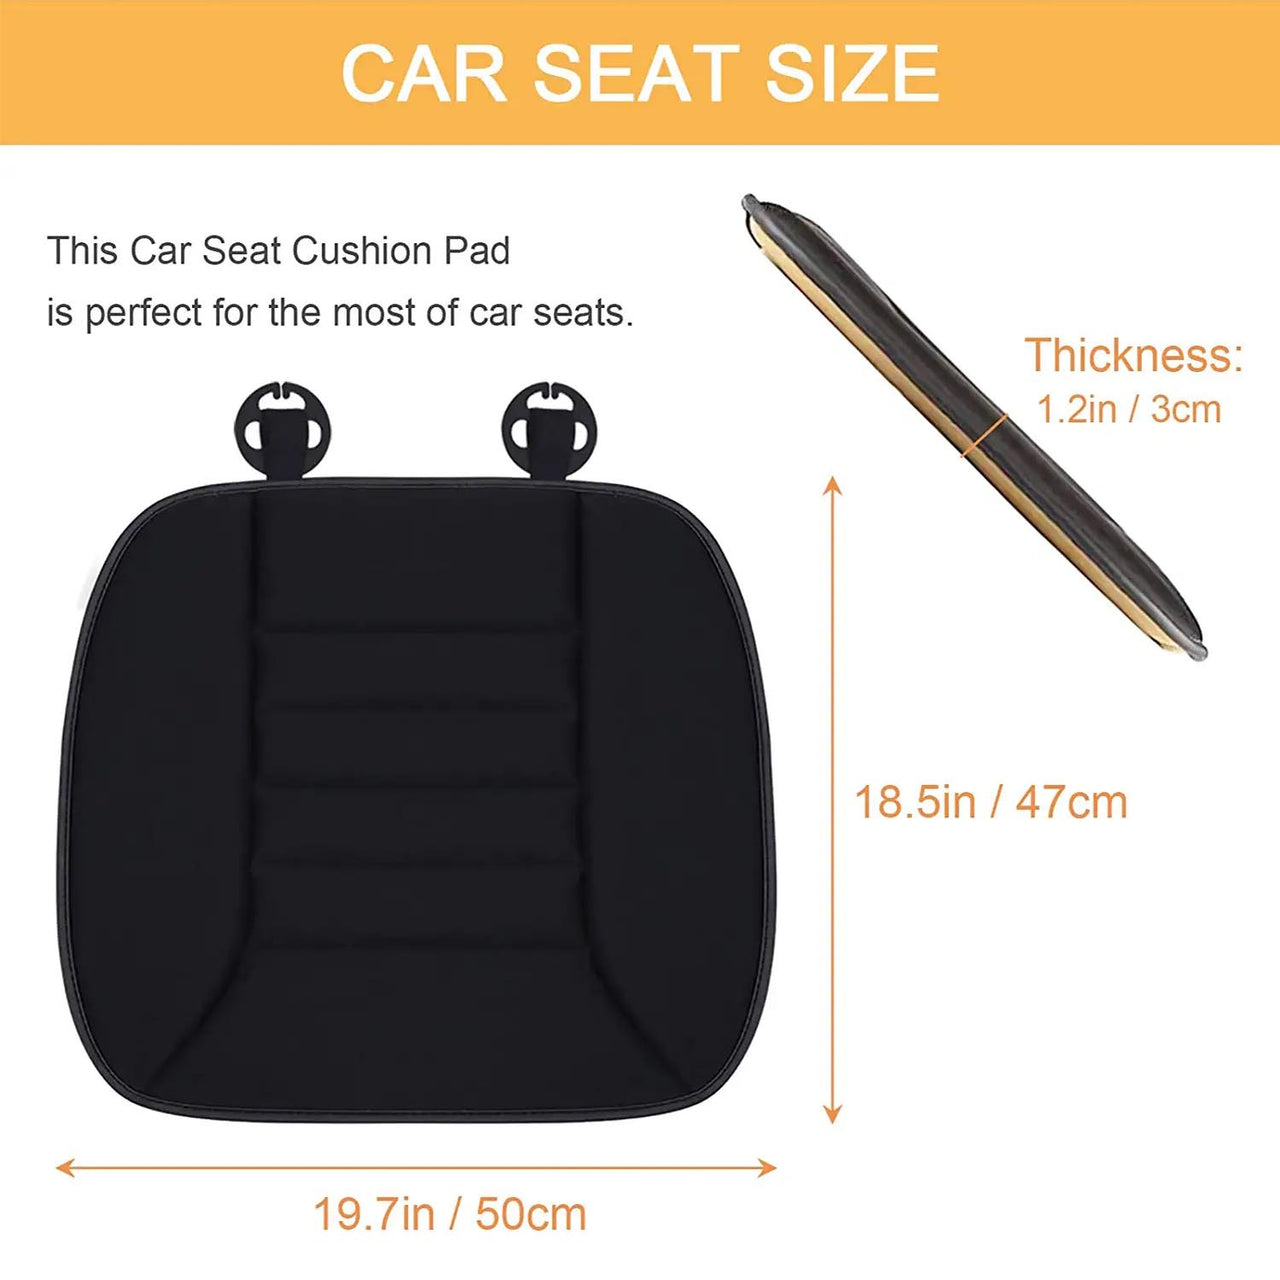 Car Seat Cushion with 1.2inch Comfort Memory Foam, Custom Logo For Your Cars, Seat Cushion for Car and Office Chair AR19989